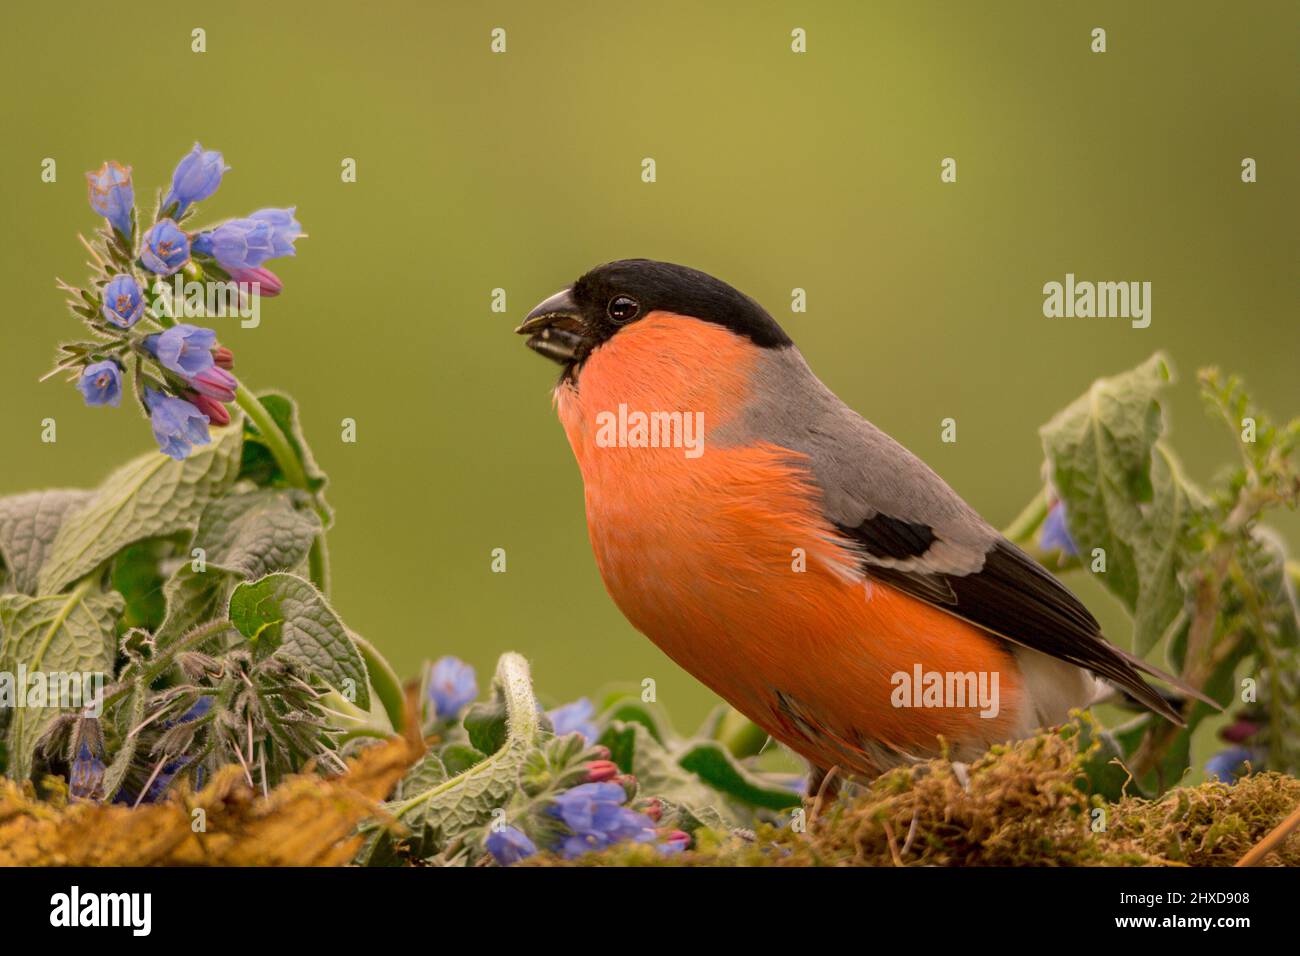 bullfinch is looking at blue flowers Stock Photo